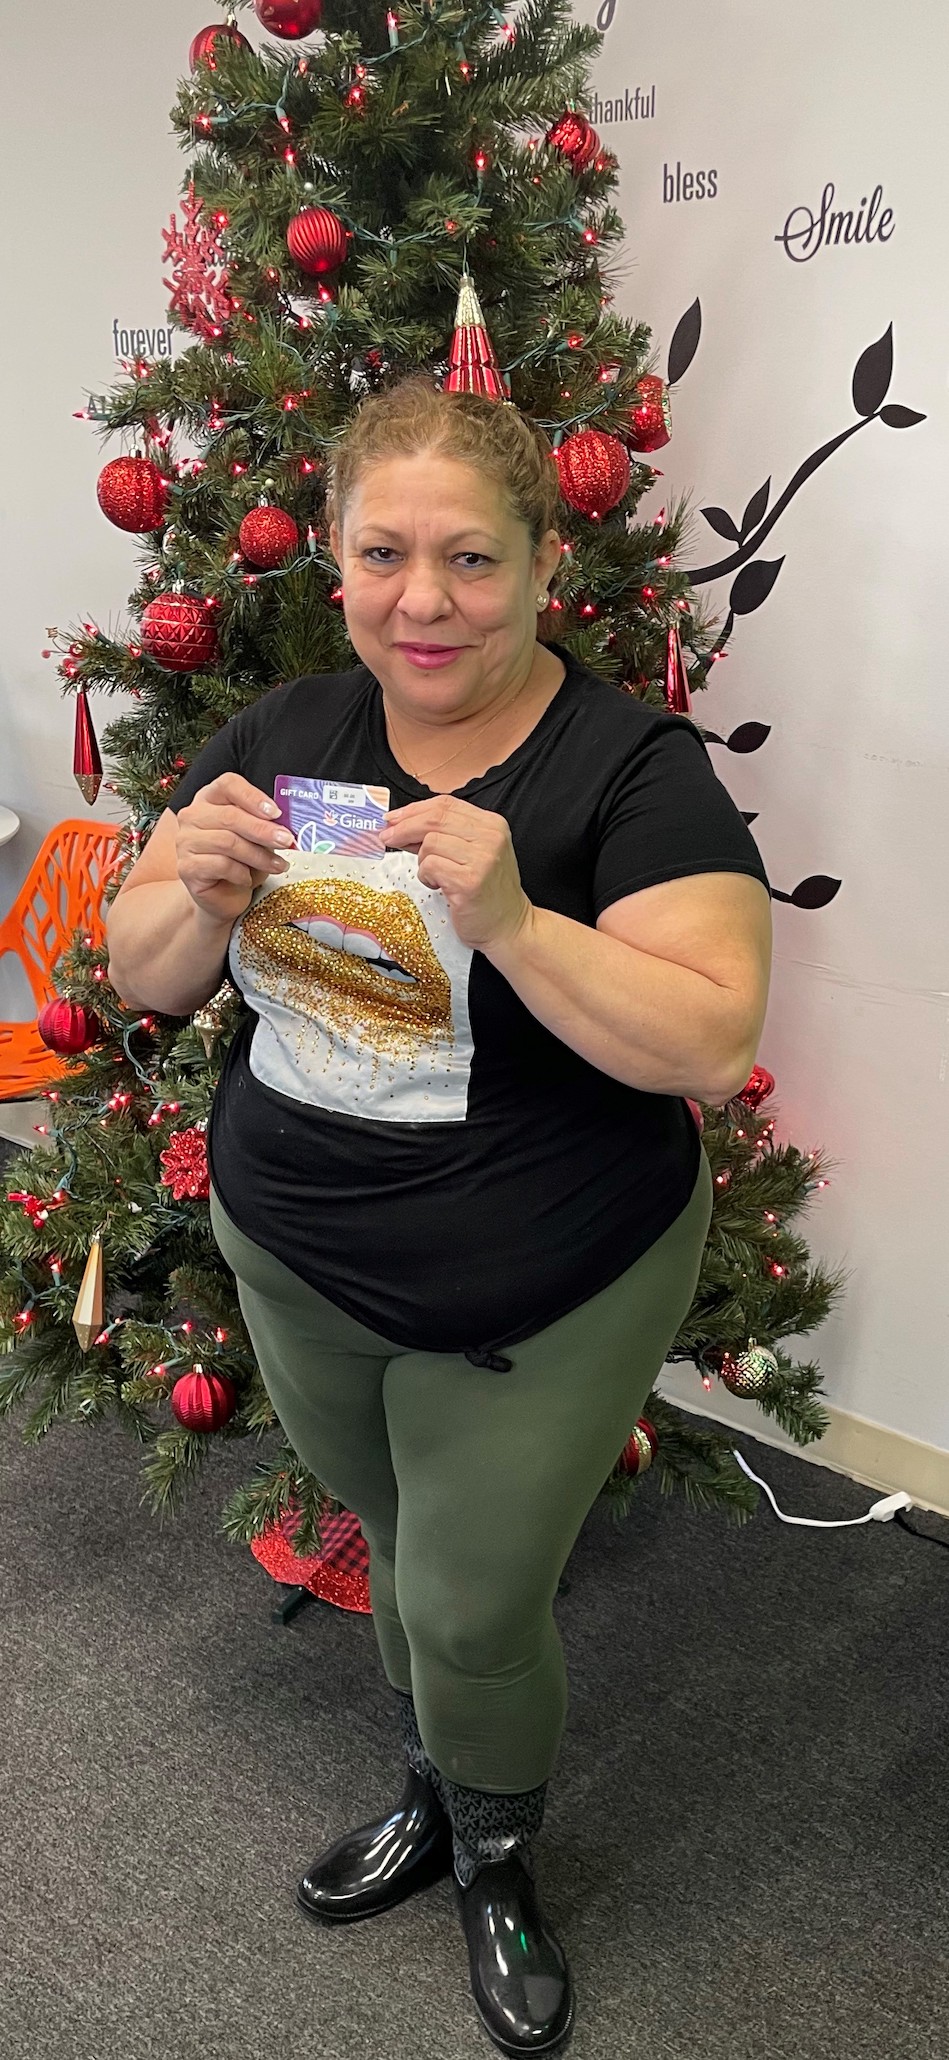 A person holding a grocery gift card from ALNV